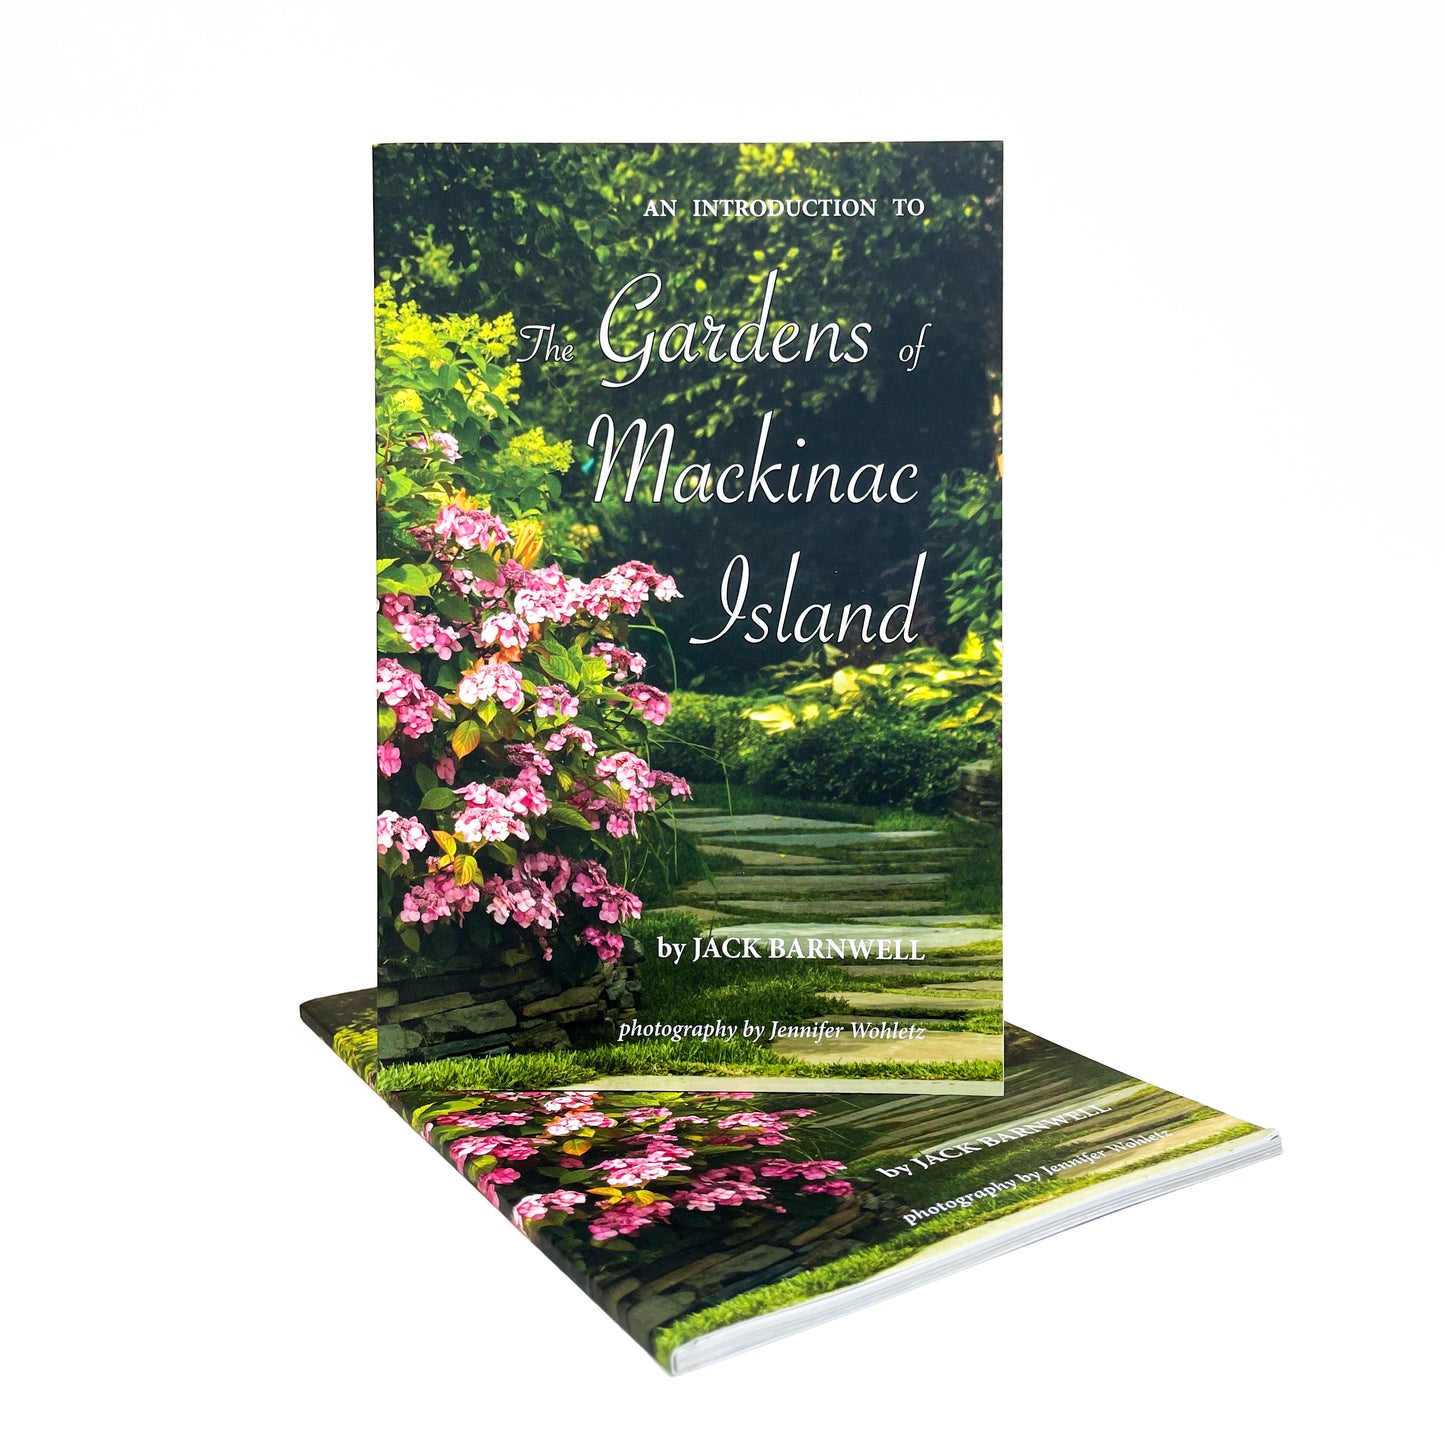 An Introduction to the Gardens of Mackinac Island by Jack Barnwell. Photography by Jennifer Wohletz. Guided by on of Mackinac's premier landscape designers, explore Mackinac Island through its most breathtaking garden vistas.